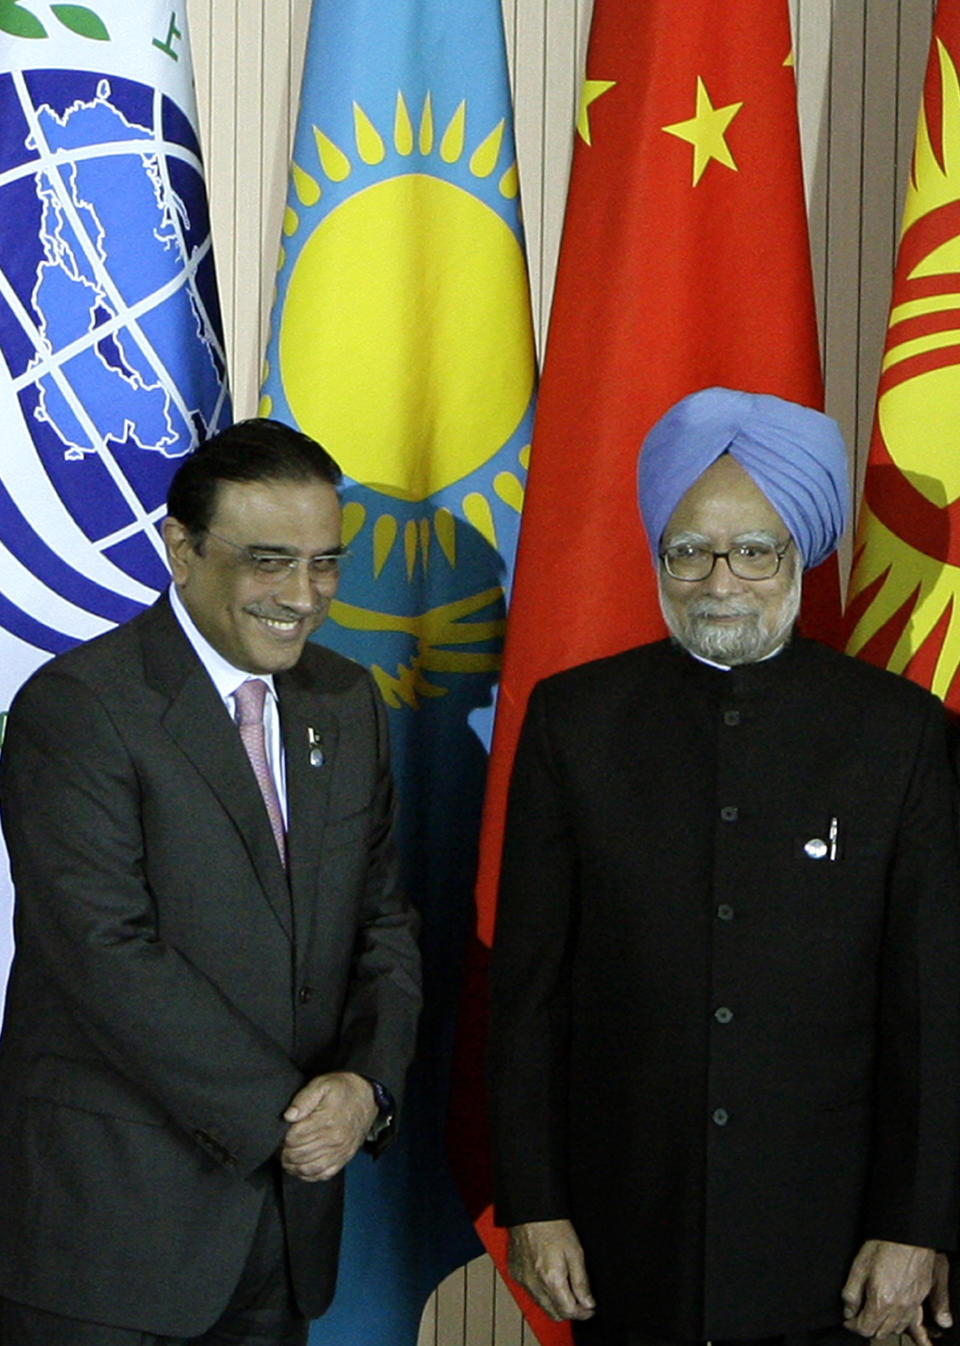 FILE - In this June 16, 2009 file photo, Pakistan's President Asif Ali Zardari, left, and Indian Prime Minister Manmohan Singh pose for a photo during a summit of the Shanghai Cooperation Organization in the Ural Mountains city of Yekaterinburg, Russia. Zardari's trip to India on Sunday, April 8, 2012, is a milestone in the warming relations between the neighbors. But, officially, he is just sharing a quick lunch with the India's leader on his way to visit a Muslim shrine. (AP Photo/Mikhail Metzel, File)